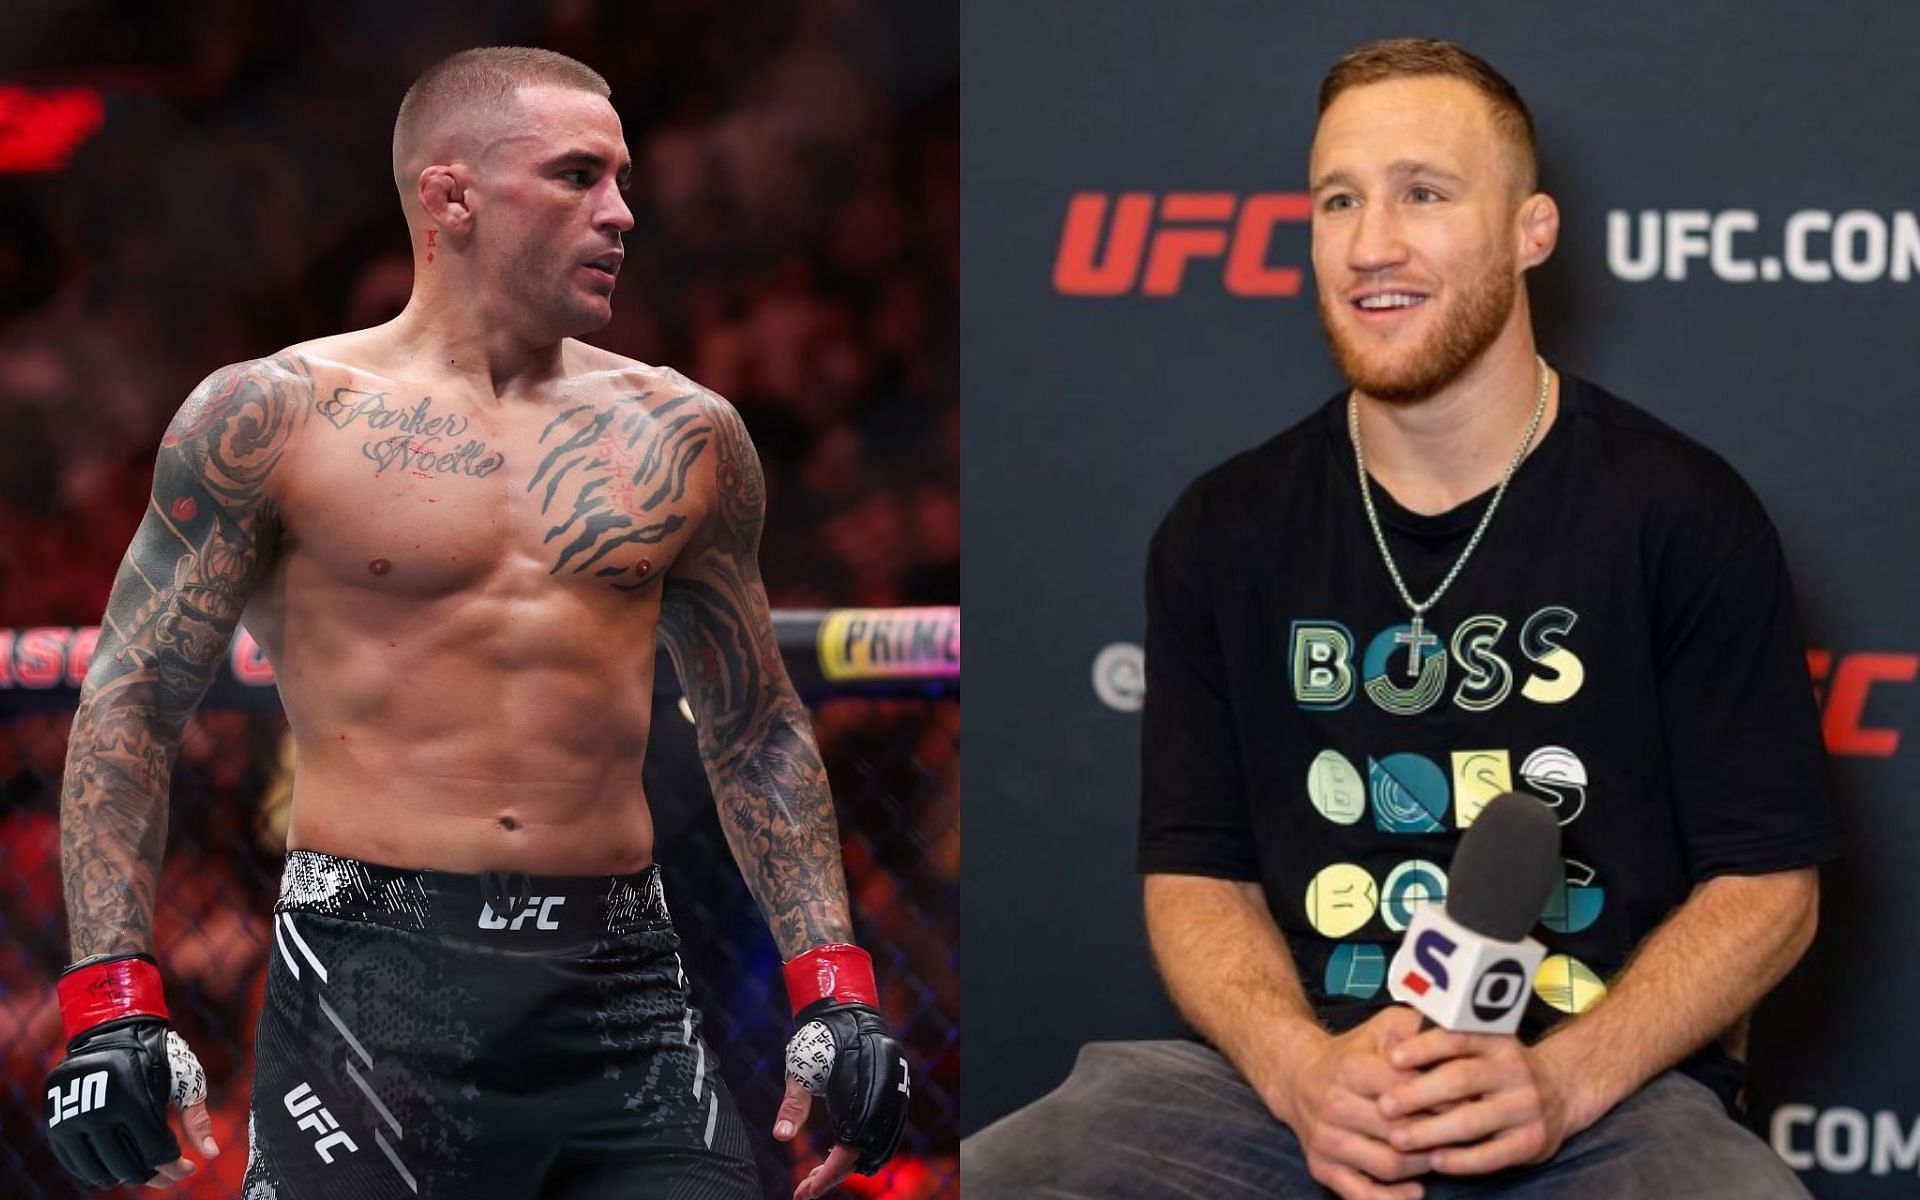 Justin Gaethje (right) shares his thoughts on Dustin Poirier (left) fighting for the title before him [Images Courtesy: @GettyImages, @justin_gaethje on Instagram]